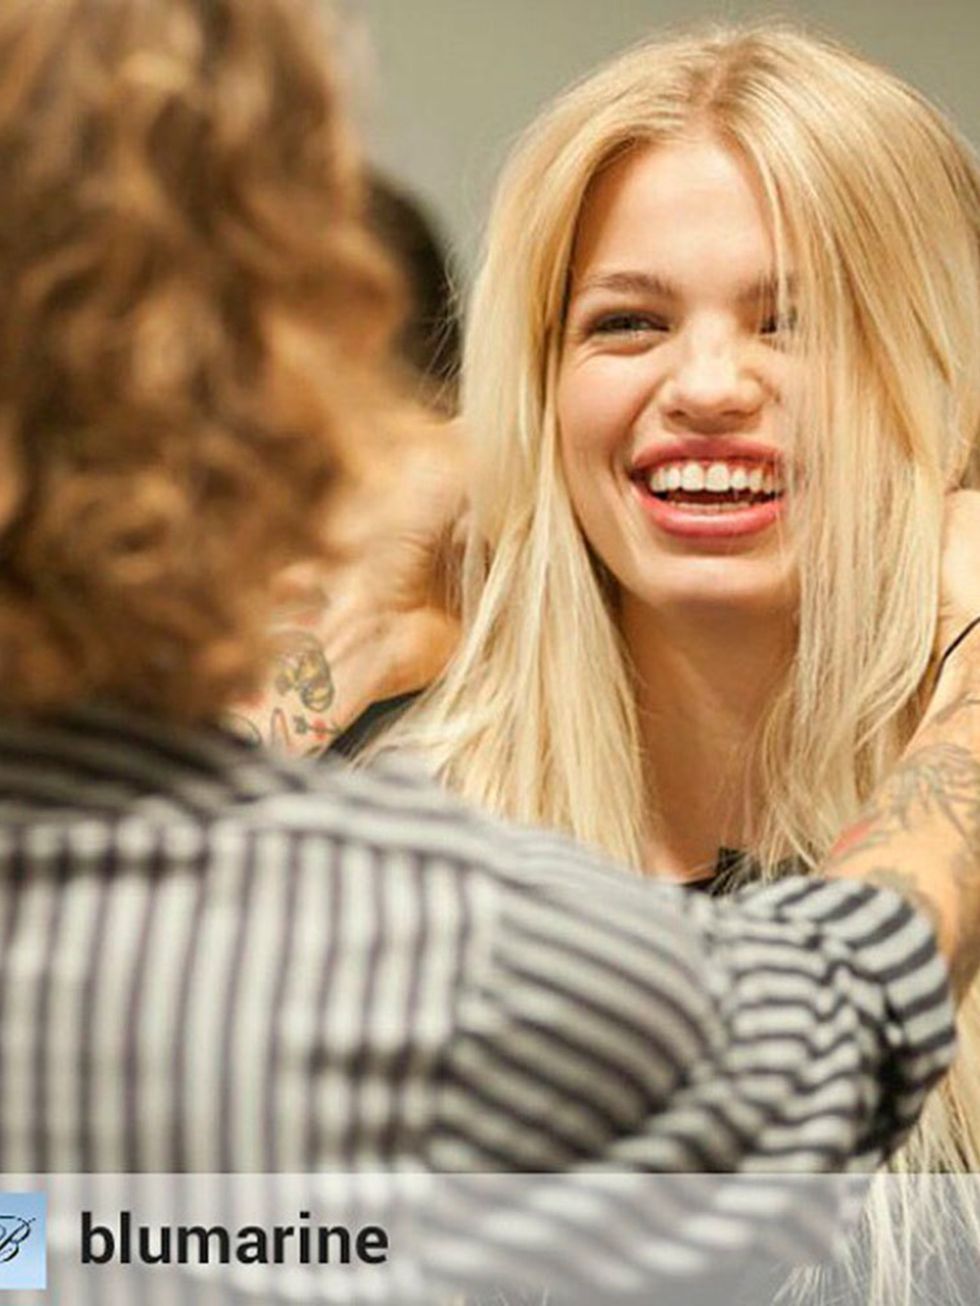 Daphne Groeneveld
(@daphnegroeneveld94)

#Repost from @blumarine with @jamespecis for the hair